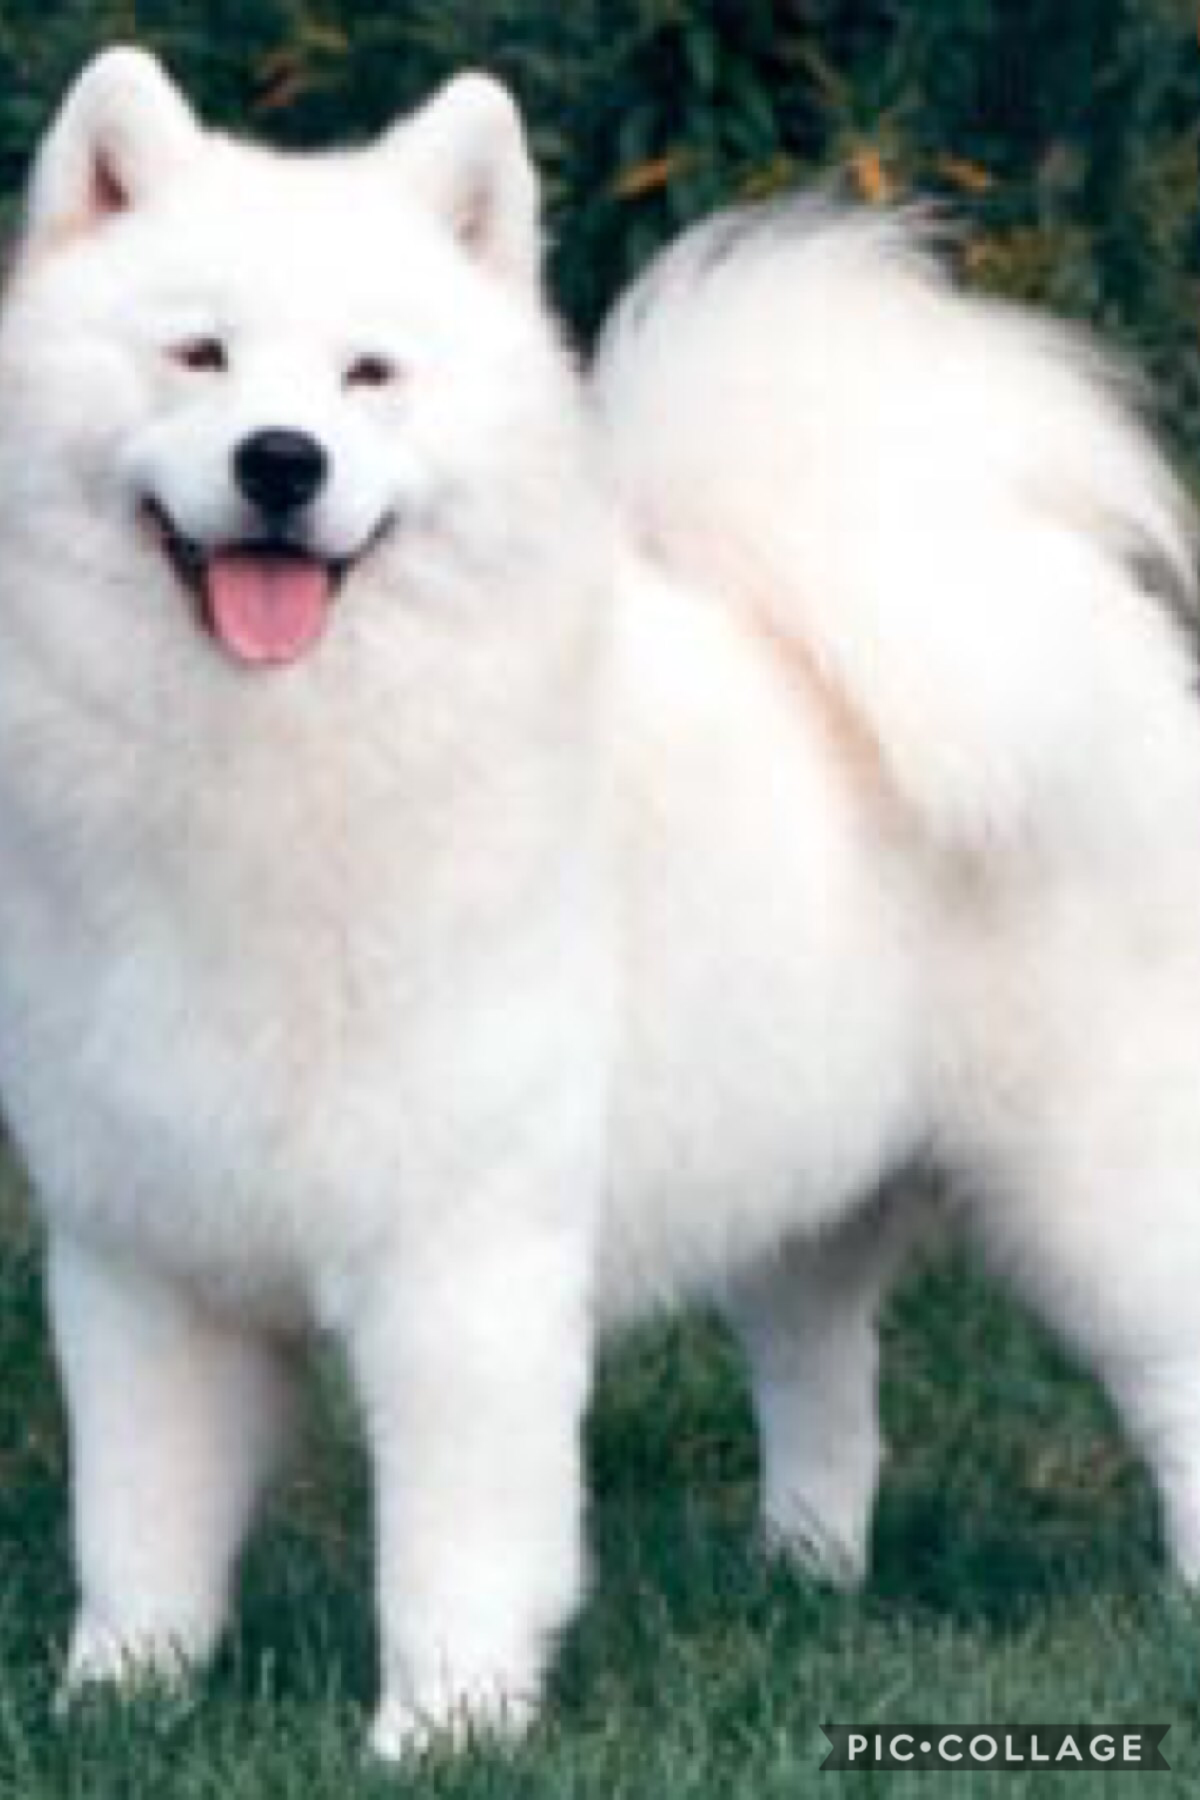 Day 22:
Your pet

I don't have a pet but I do want this one fluffy white dog I'm pretty sure it's a Samoyed they're adorable and soft they're also really cute 

Have a happy Friday!!! Love y'all 😘😘